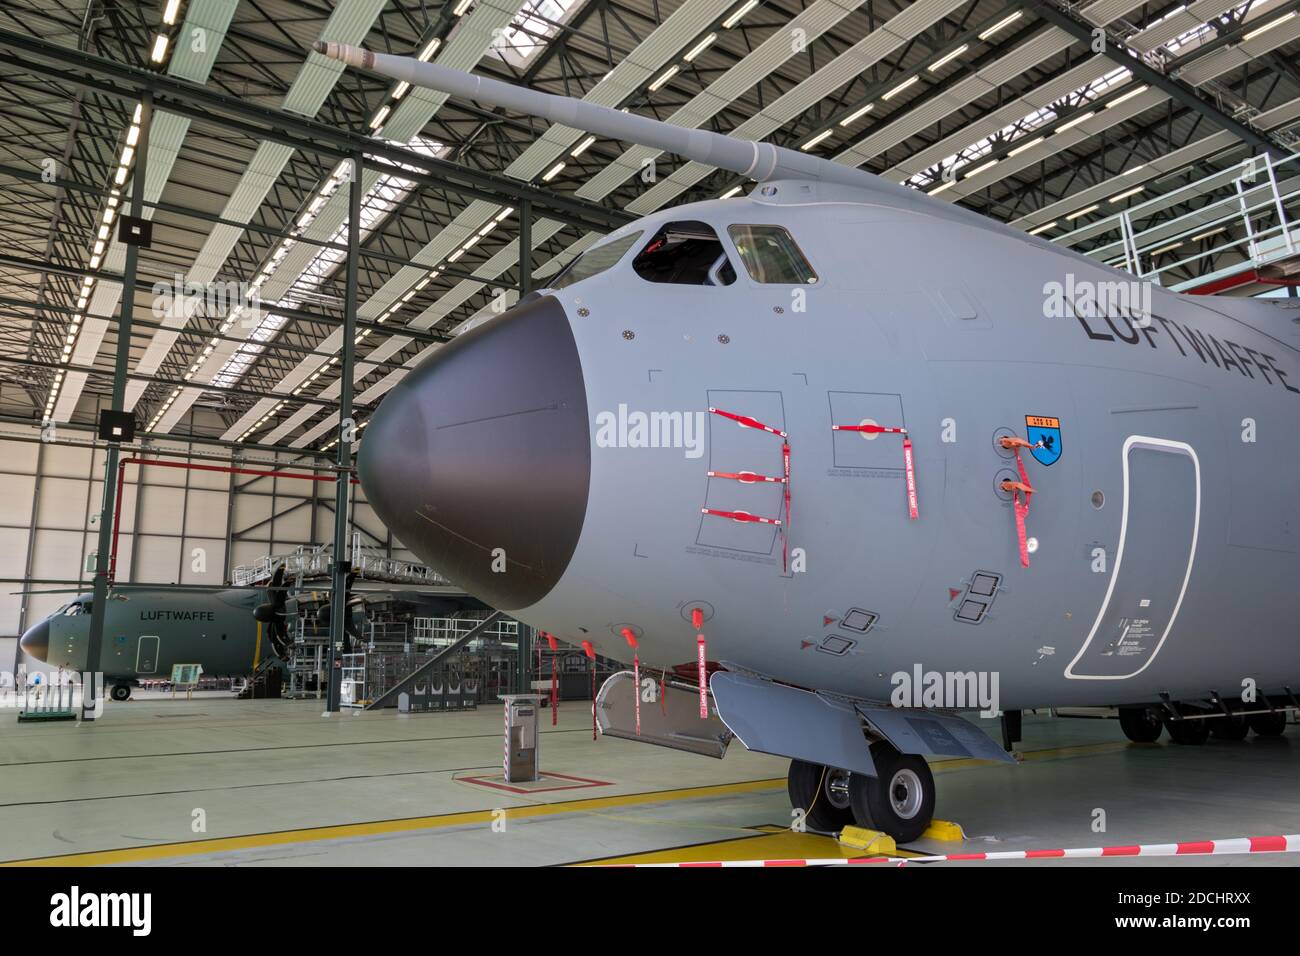 German Air Force Luftwaffe Airbus A400M military transport planes in a hangar at it`s homebase Wunstorf airbase. Germany - Jun 9, 2018 Stock Photo